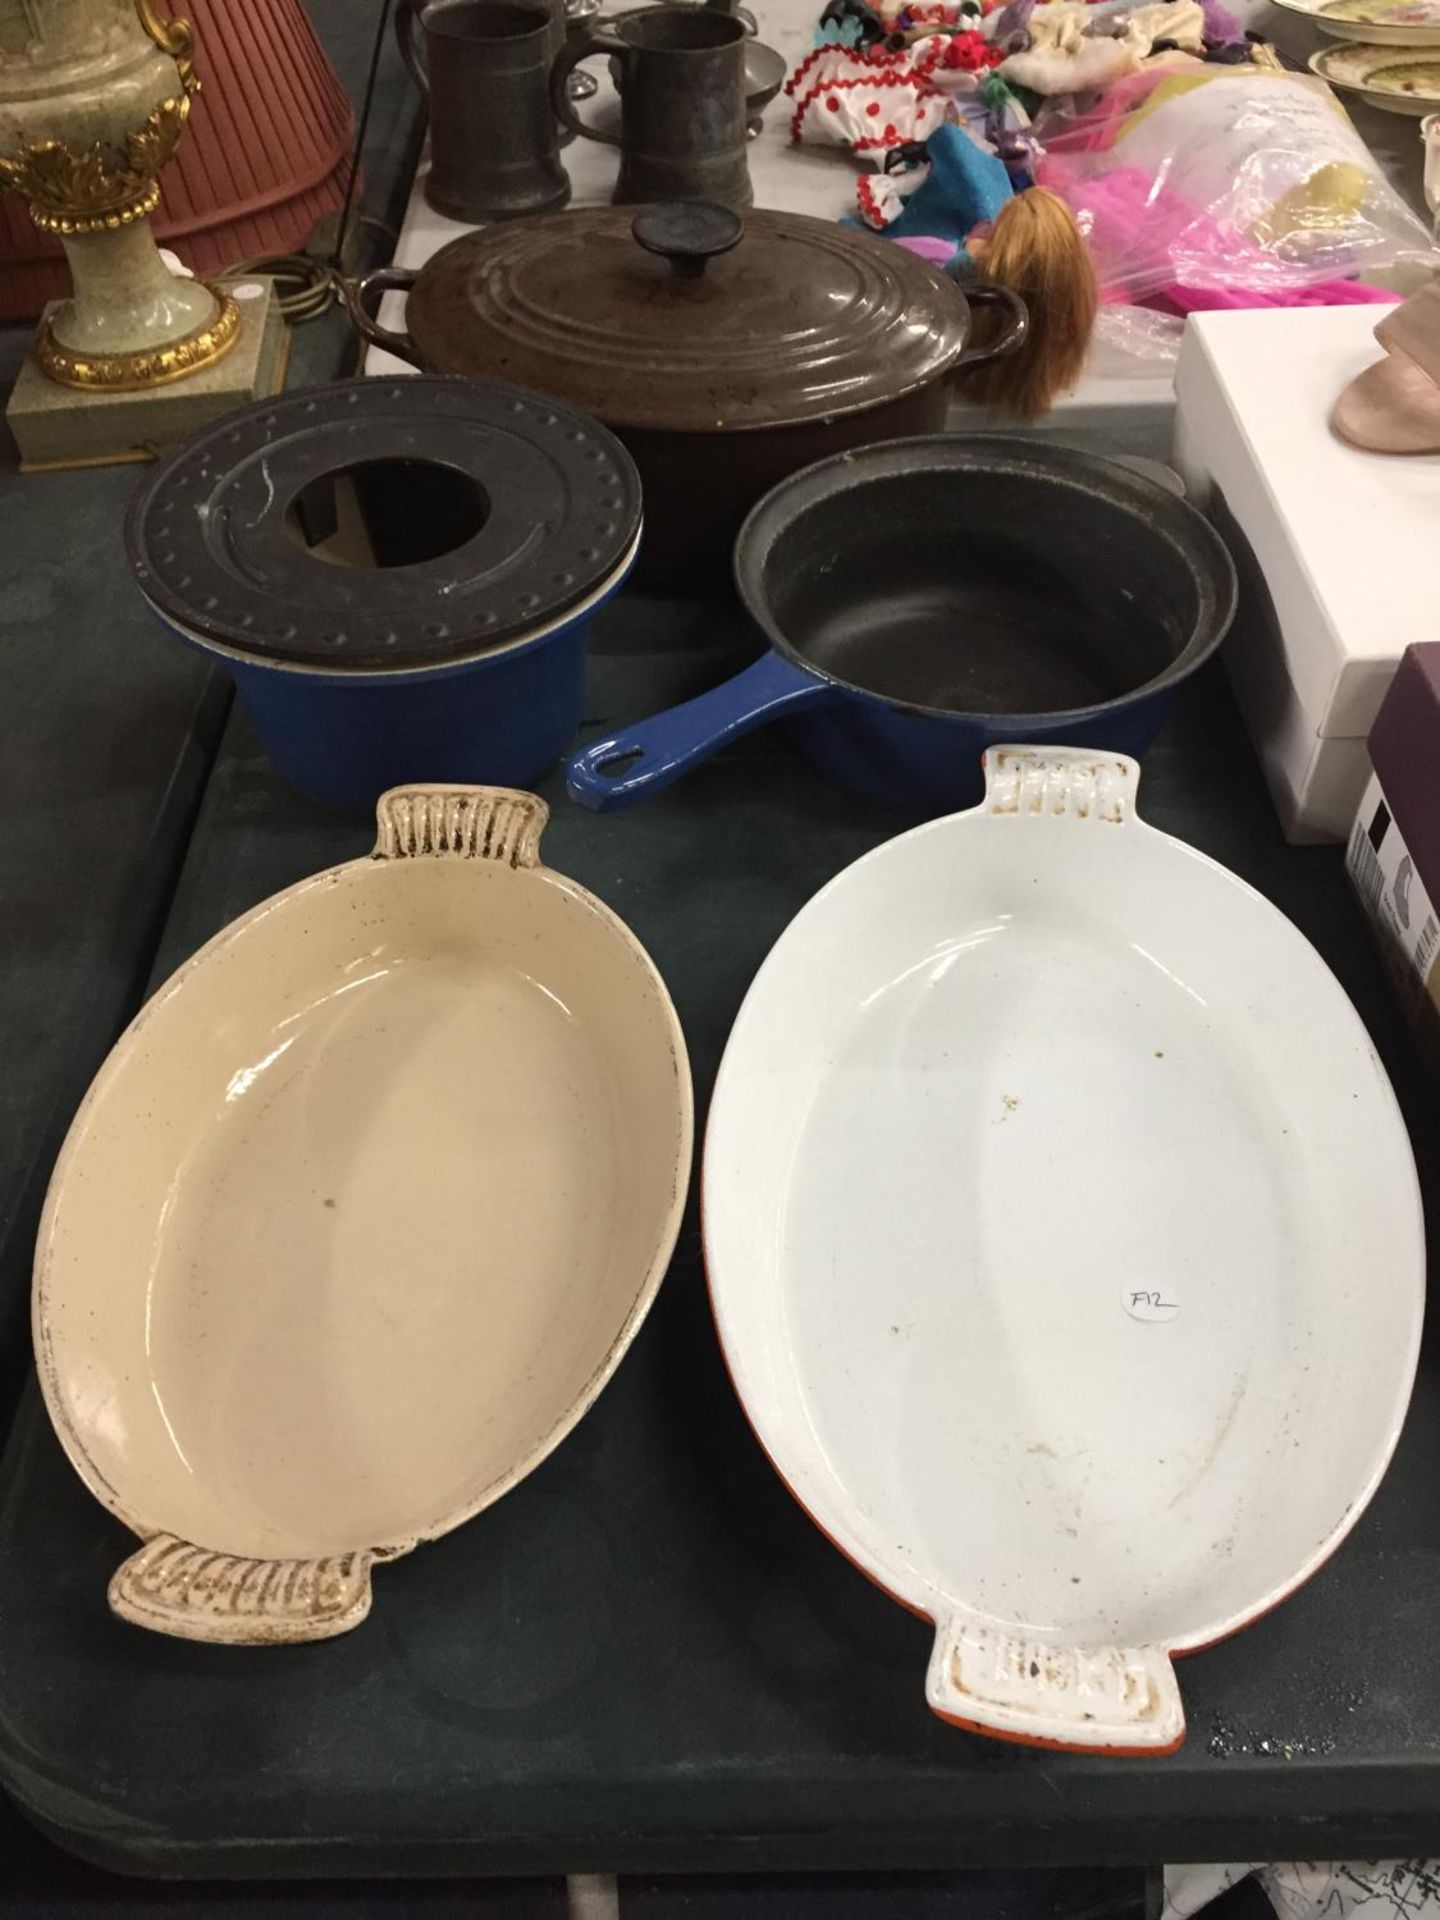 FOUR LE CREUSET COOKING DISHES AND PANS PLUS ONE OTHER